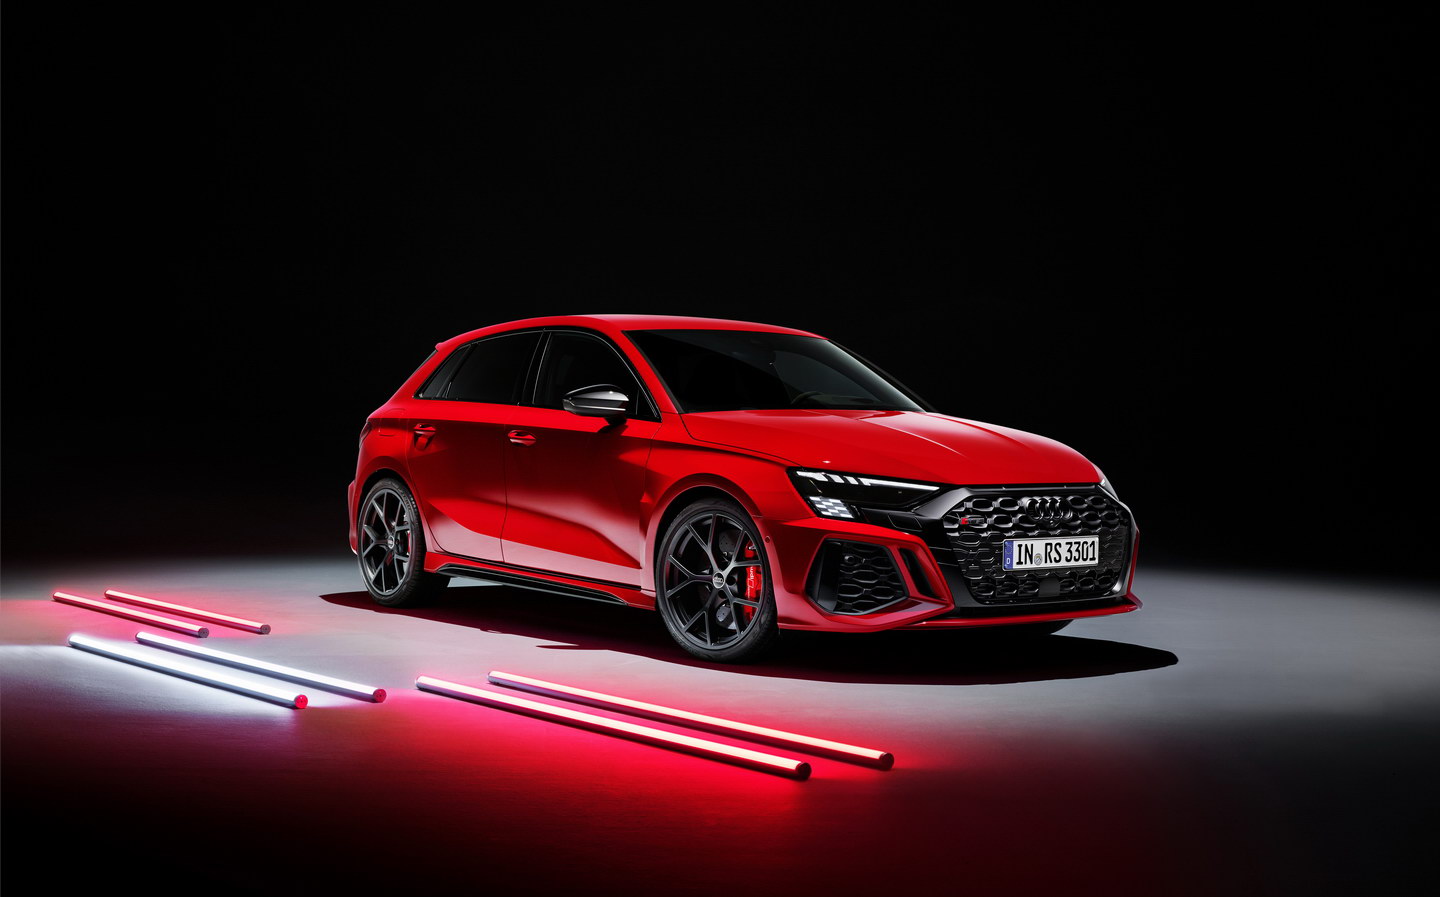 New Audi RS 3 gets 394bhp, drift mode, LEDs that spell its name